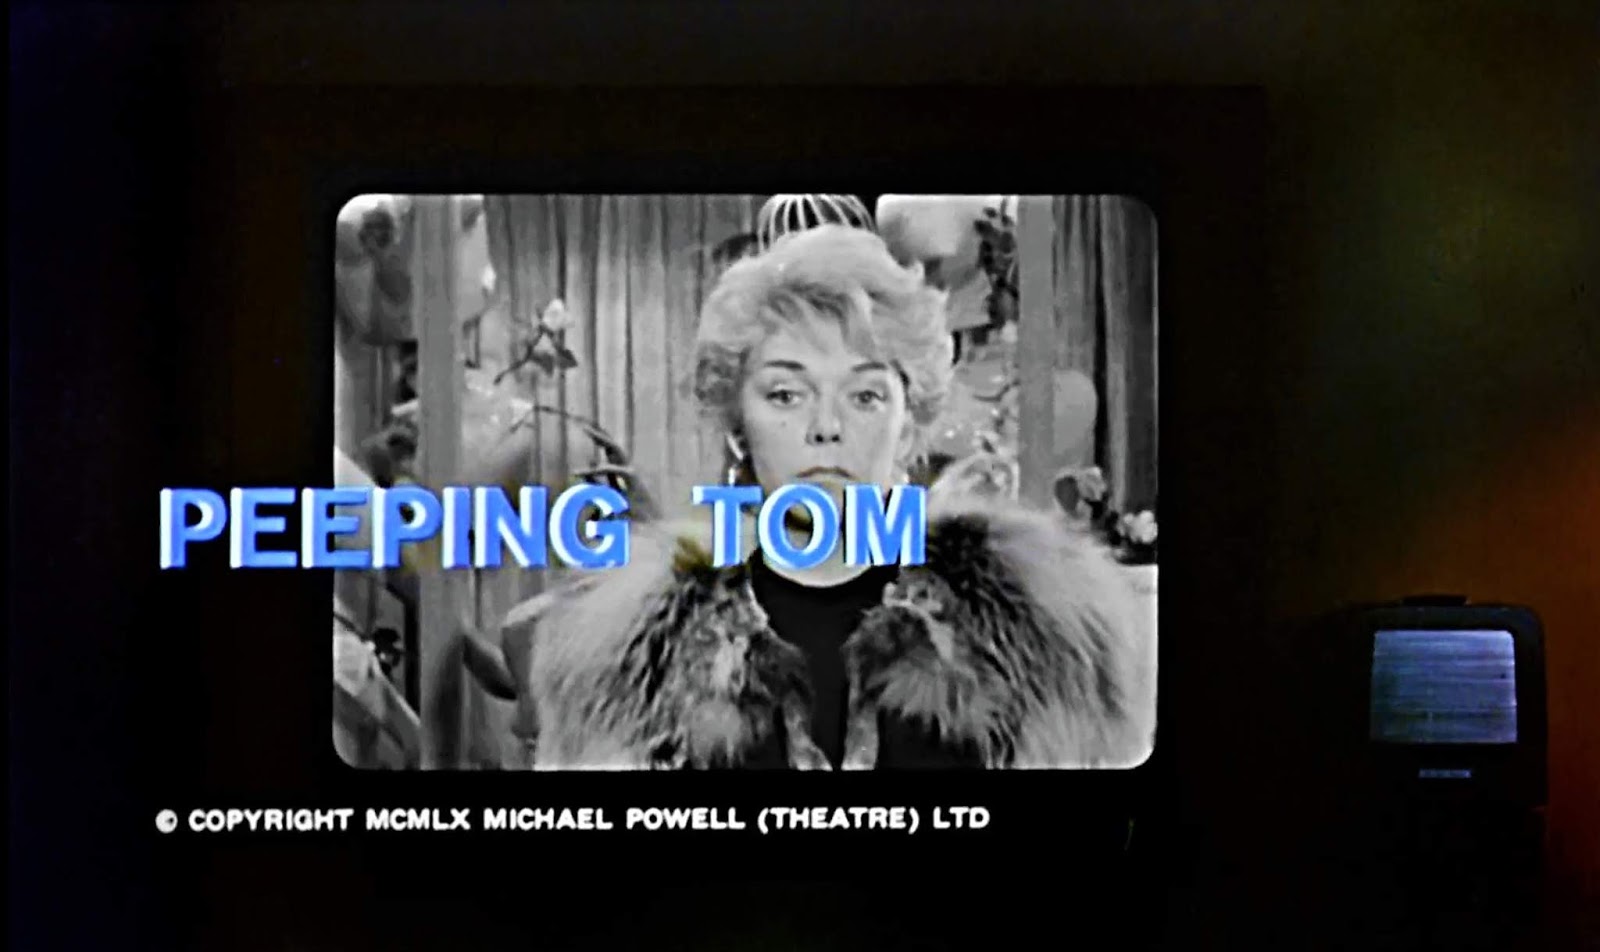 DREAMS ARE WHAT LE CINEMA IS FOR... PEEPING TOM 1960 pic